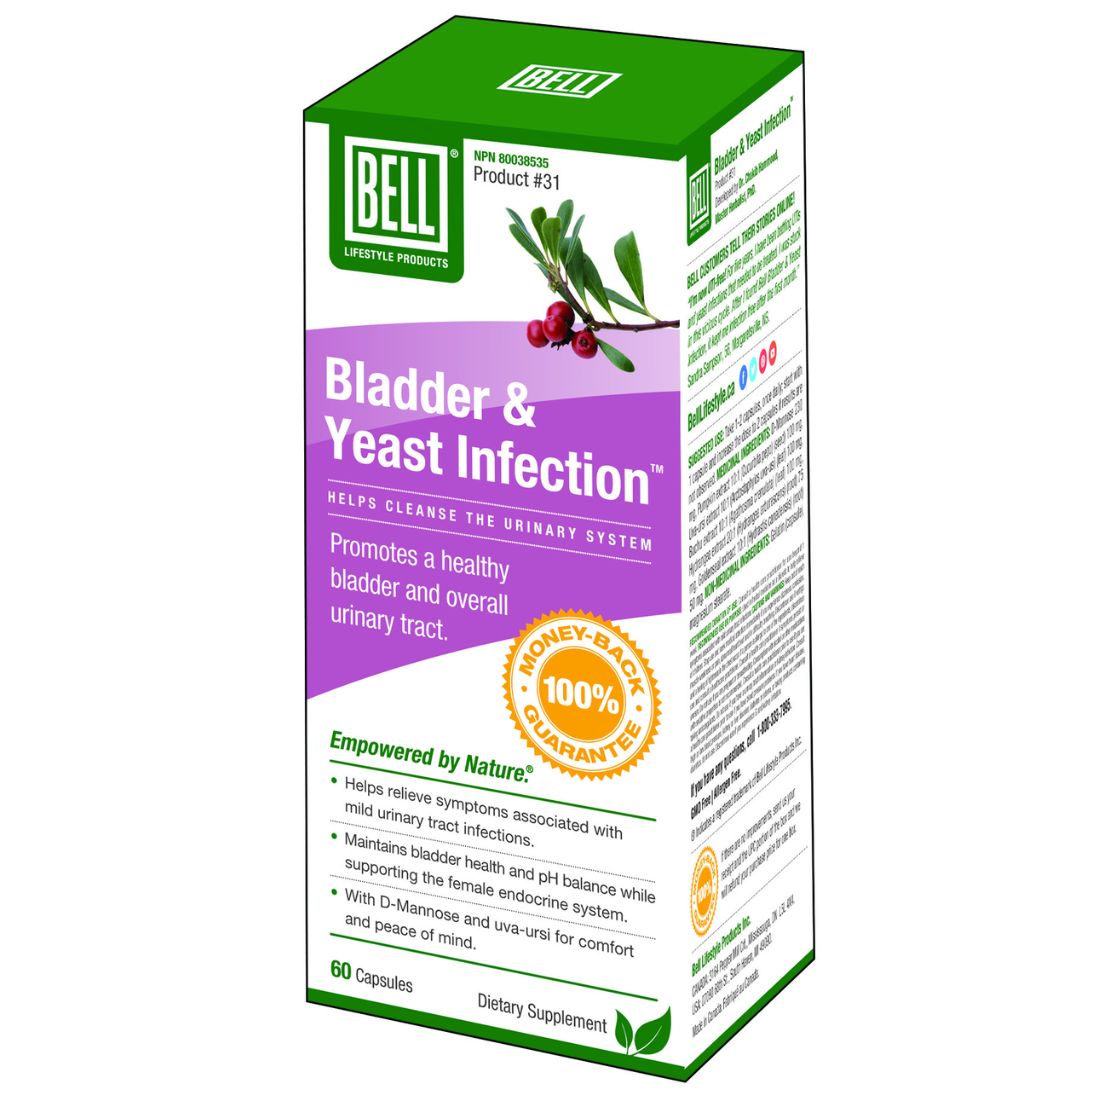 Bell Bladder & Yeast Infection #31, 60 Capsules